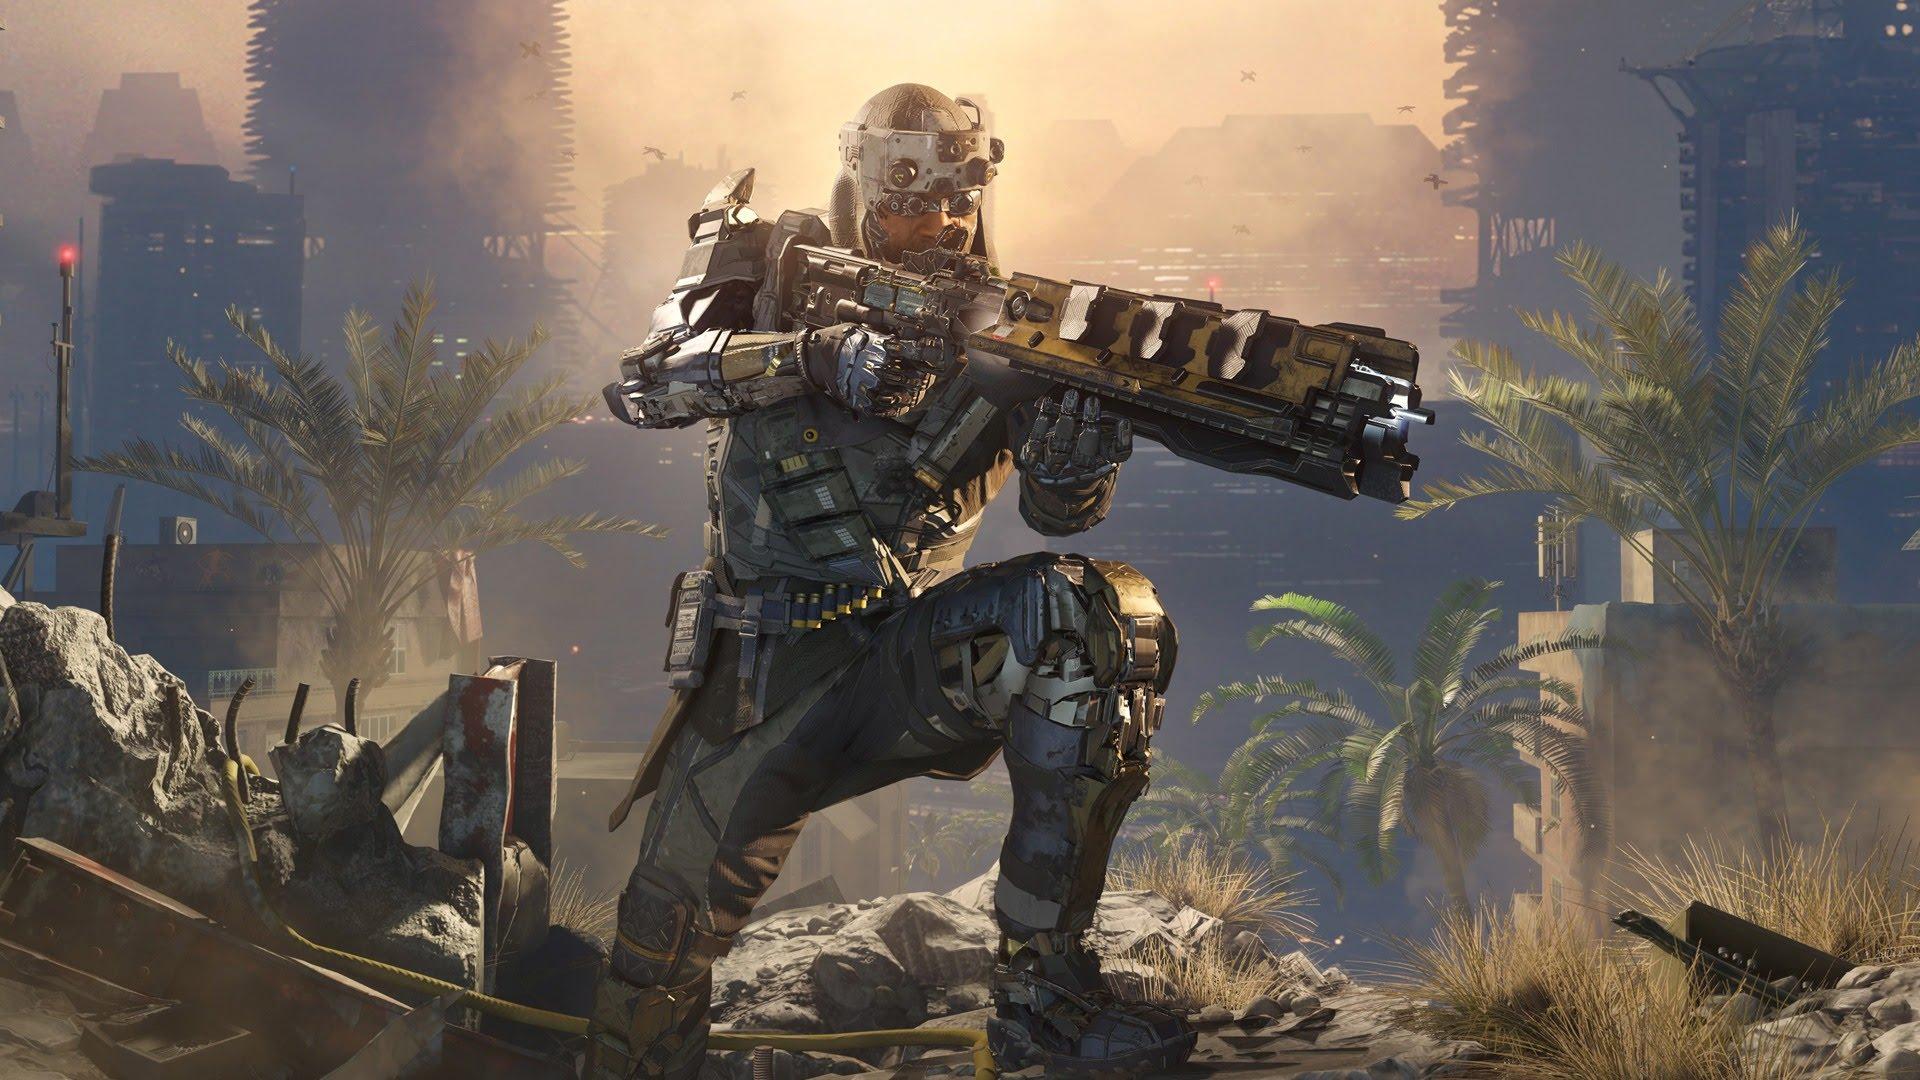 Call of Duty: Black Ops 4' Confirms No Single Player and a New Mode